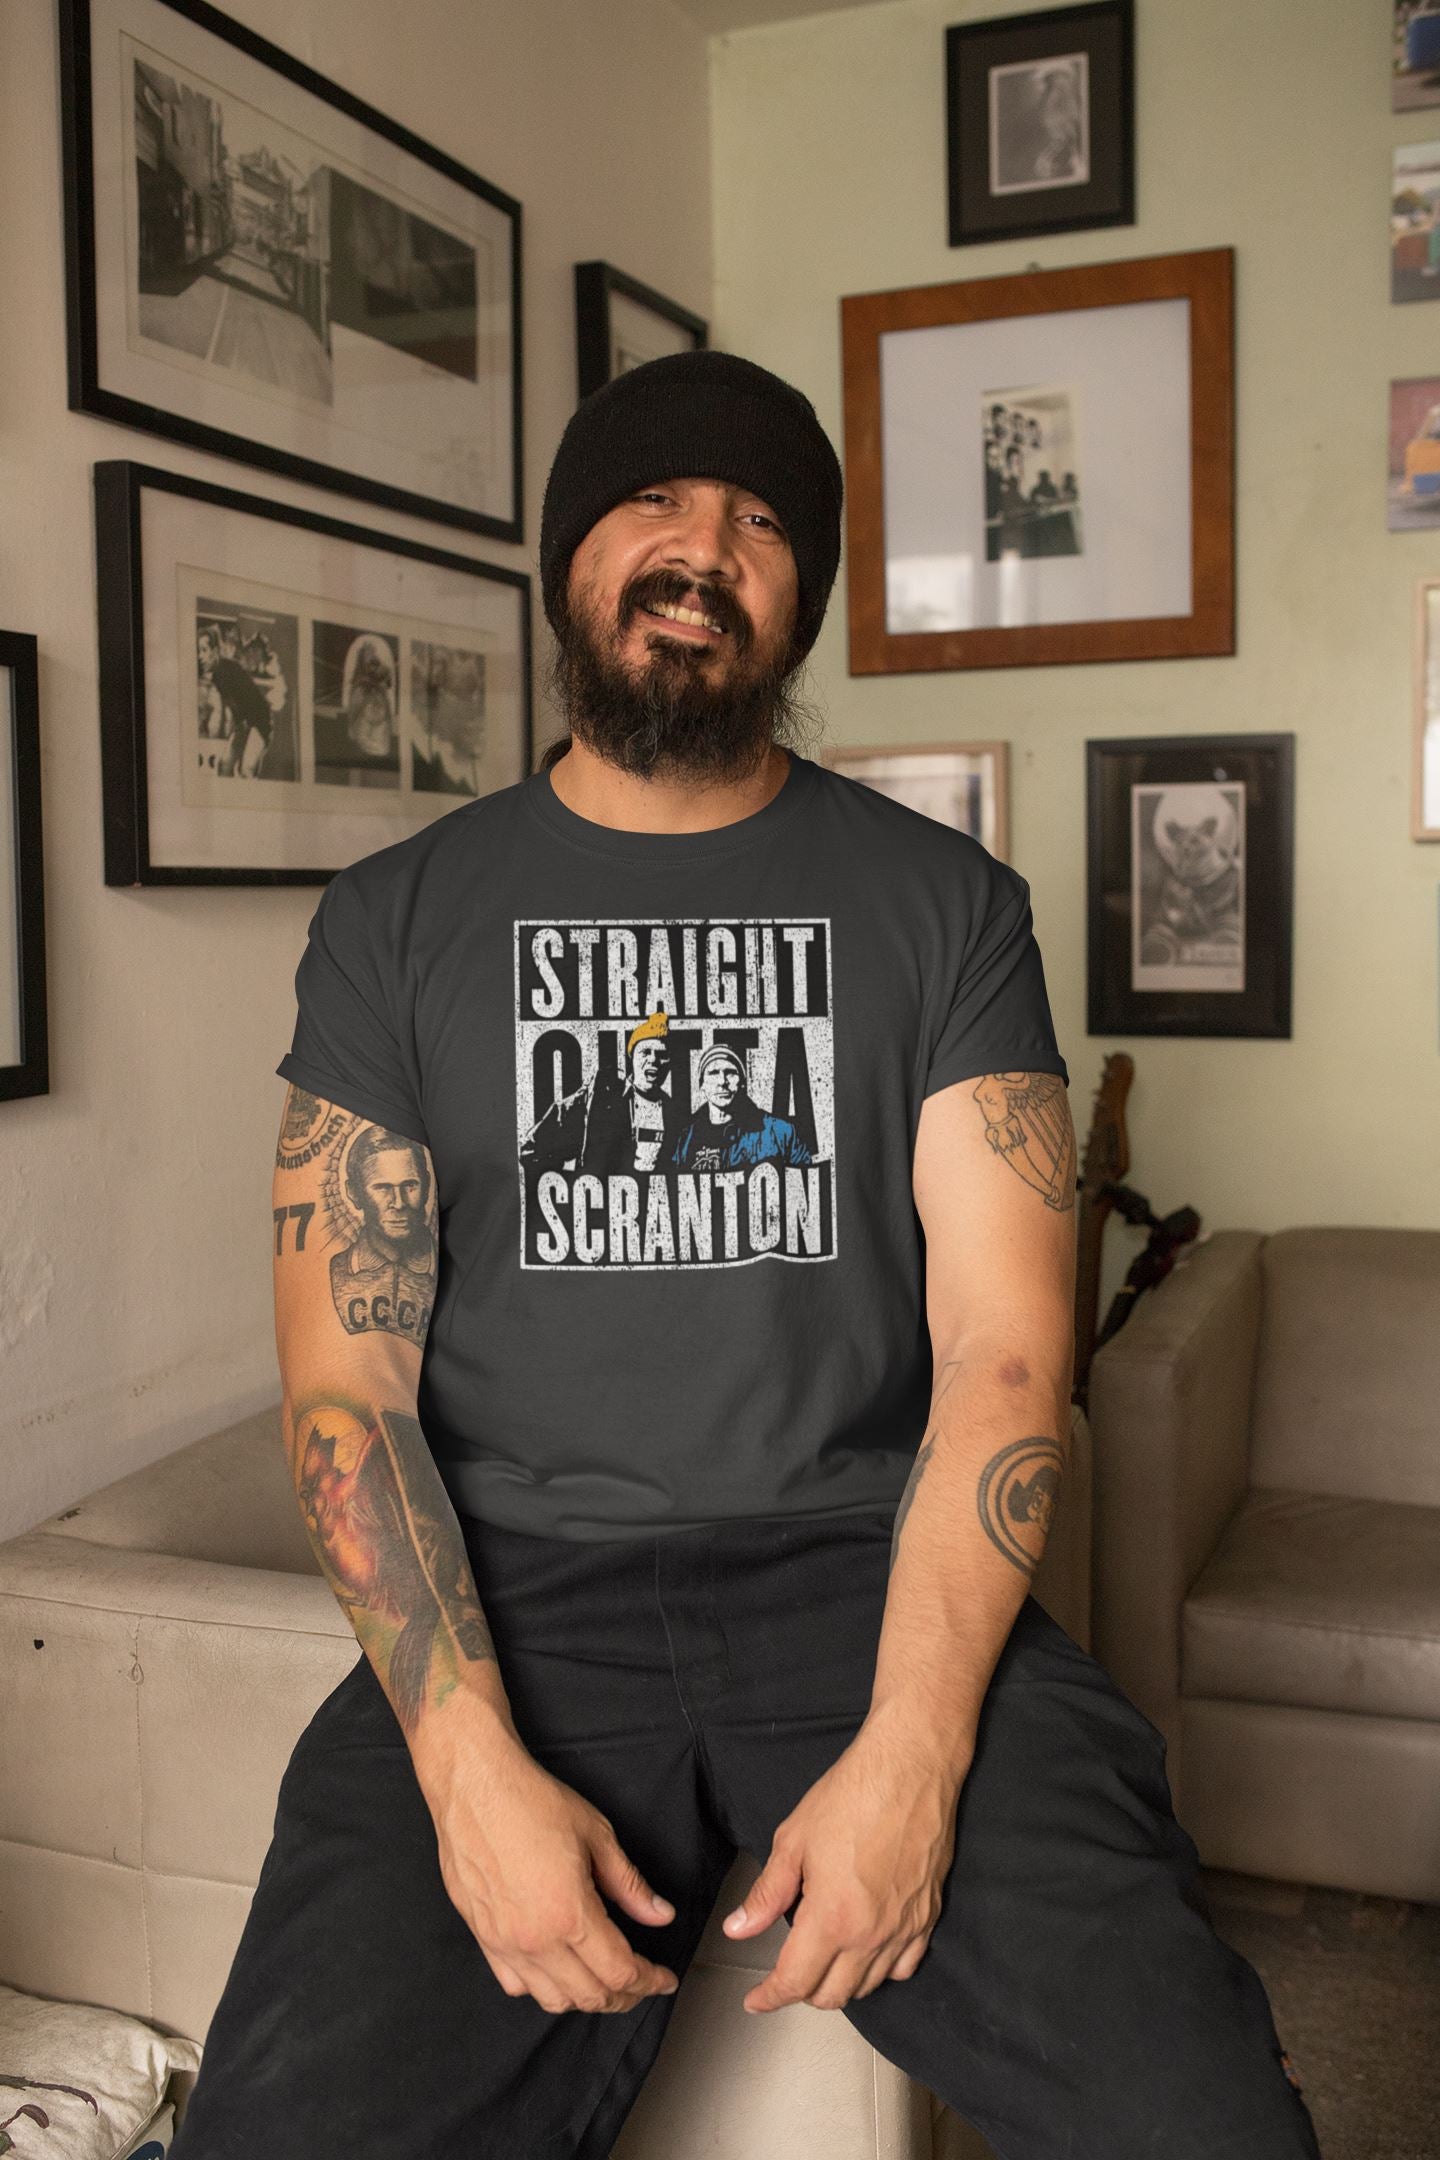 Straight Outta Scranton The Electric City Official "The Office" T Shirt for Men and Women freeshipping - Catch My Drift India